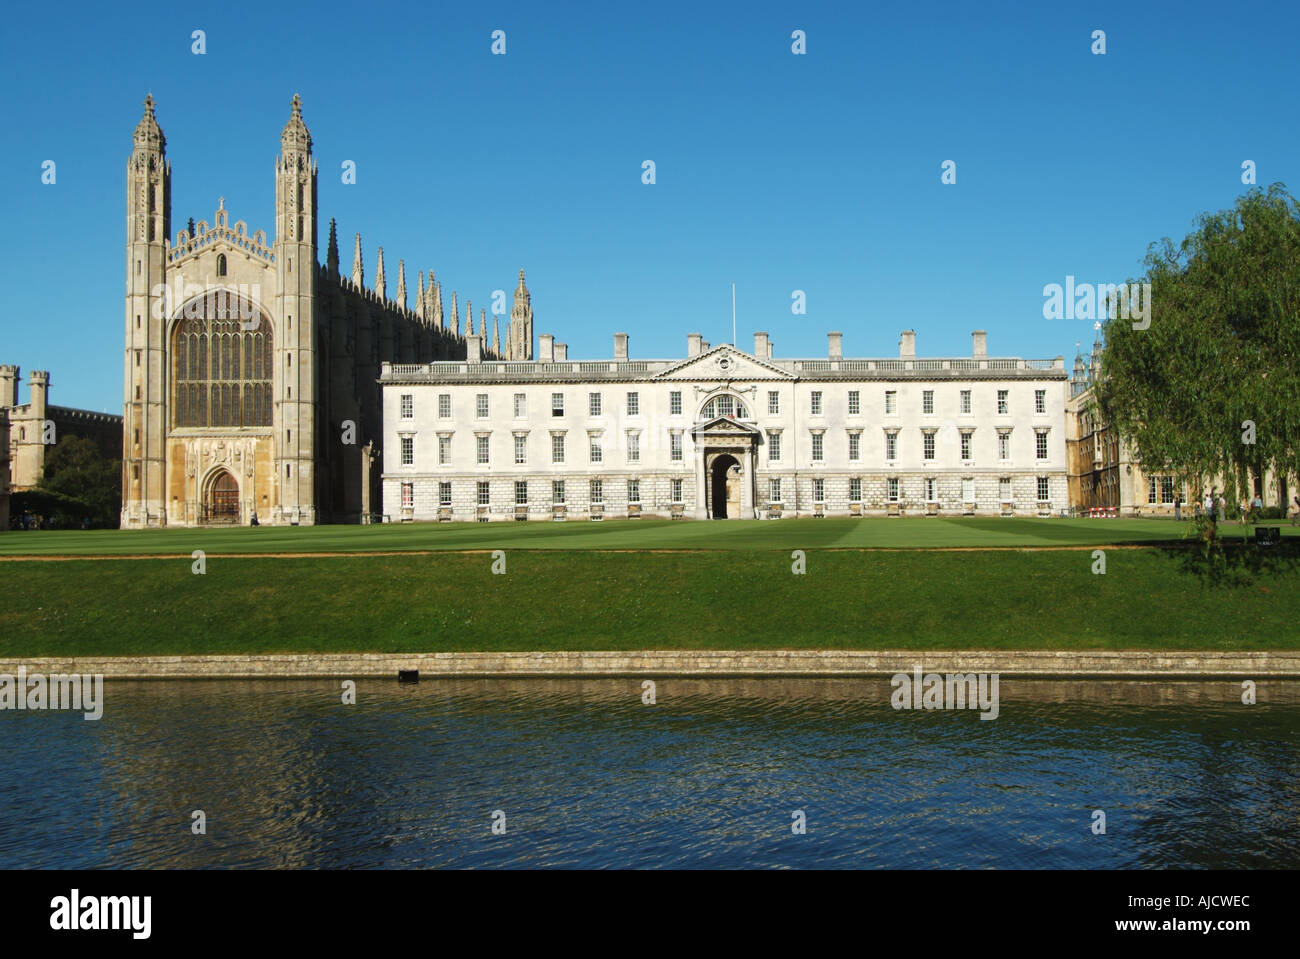 Peaceful River Cam landscape historical Grade I listed Kings College Chapel & the Gibbs building from The Backs in famous Cambridge university town UK Stock Photo